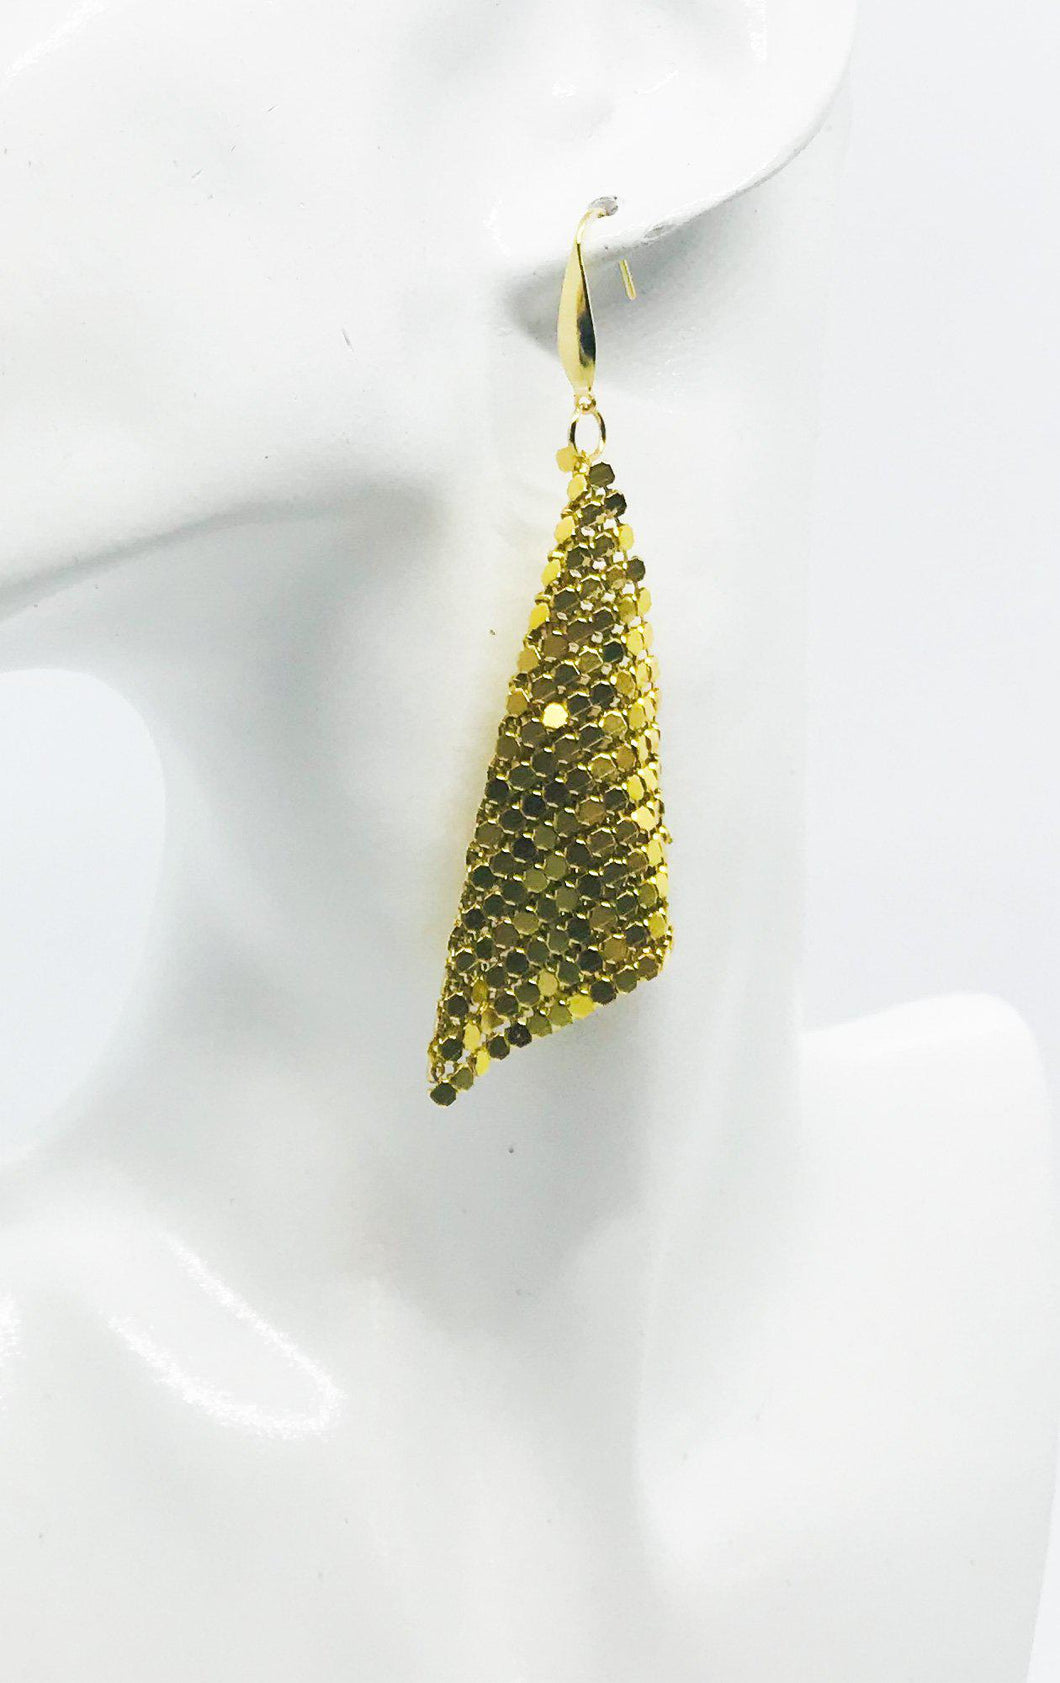 Gold Chainmail Earrings - E19-430